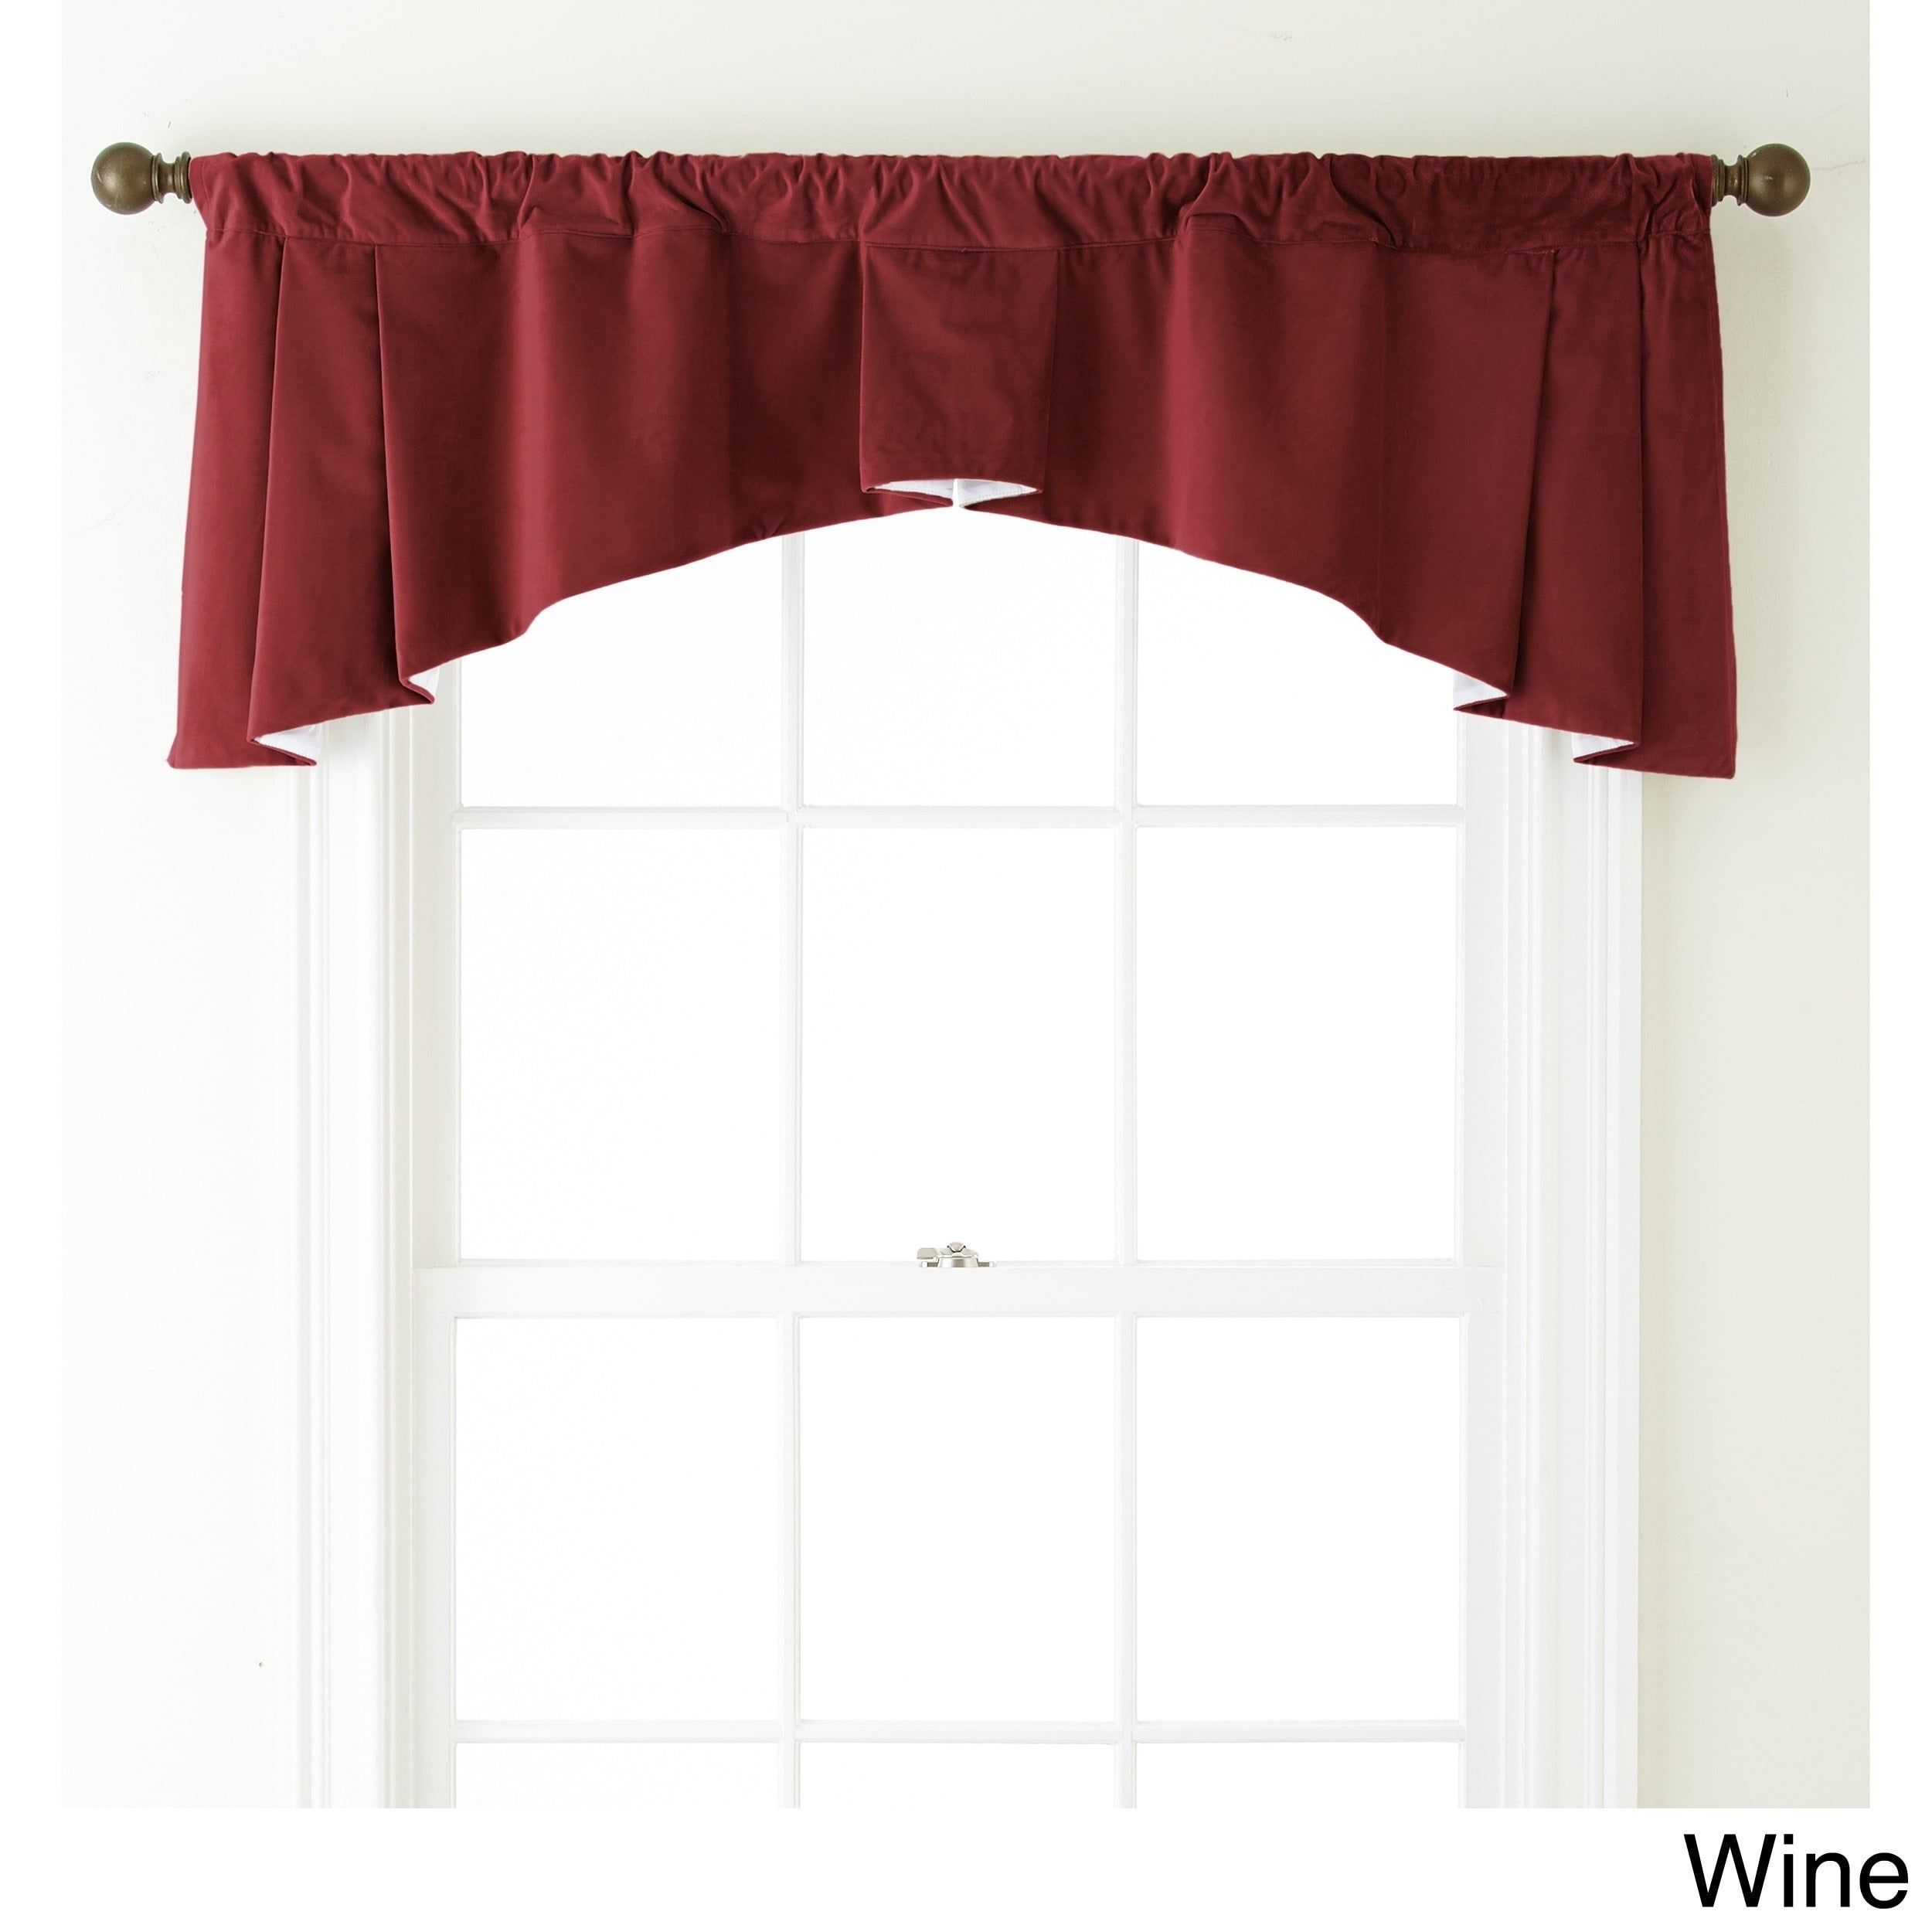 Grand Avenue Remedy 54 X 20 Inch Solid Curtain Valance – 54 X 20 For Flinders Forge 30 Inch Tiers In Garnet (Photo 8 of 20)